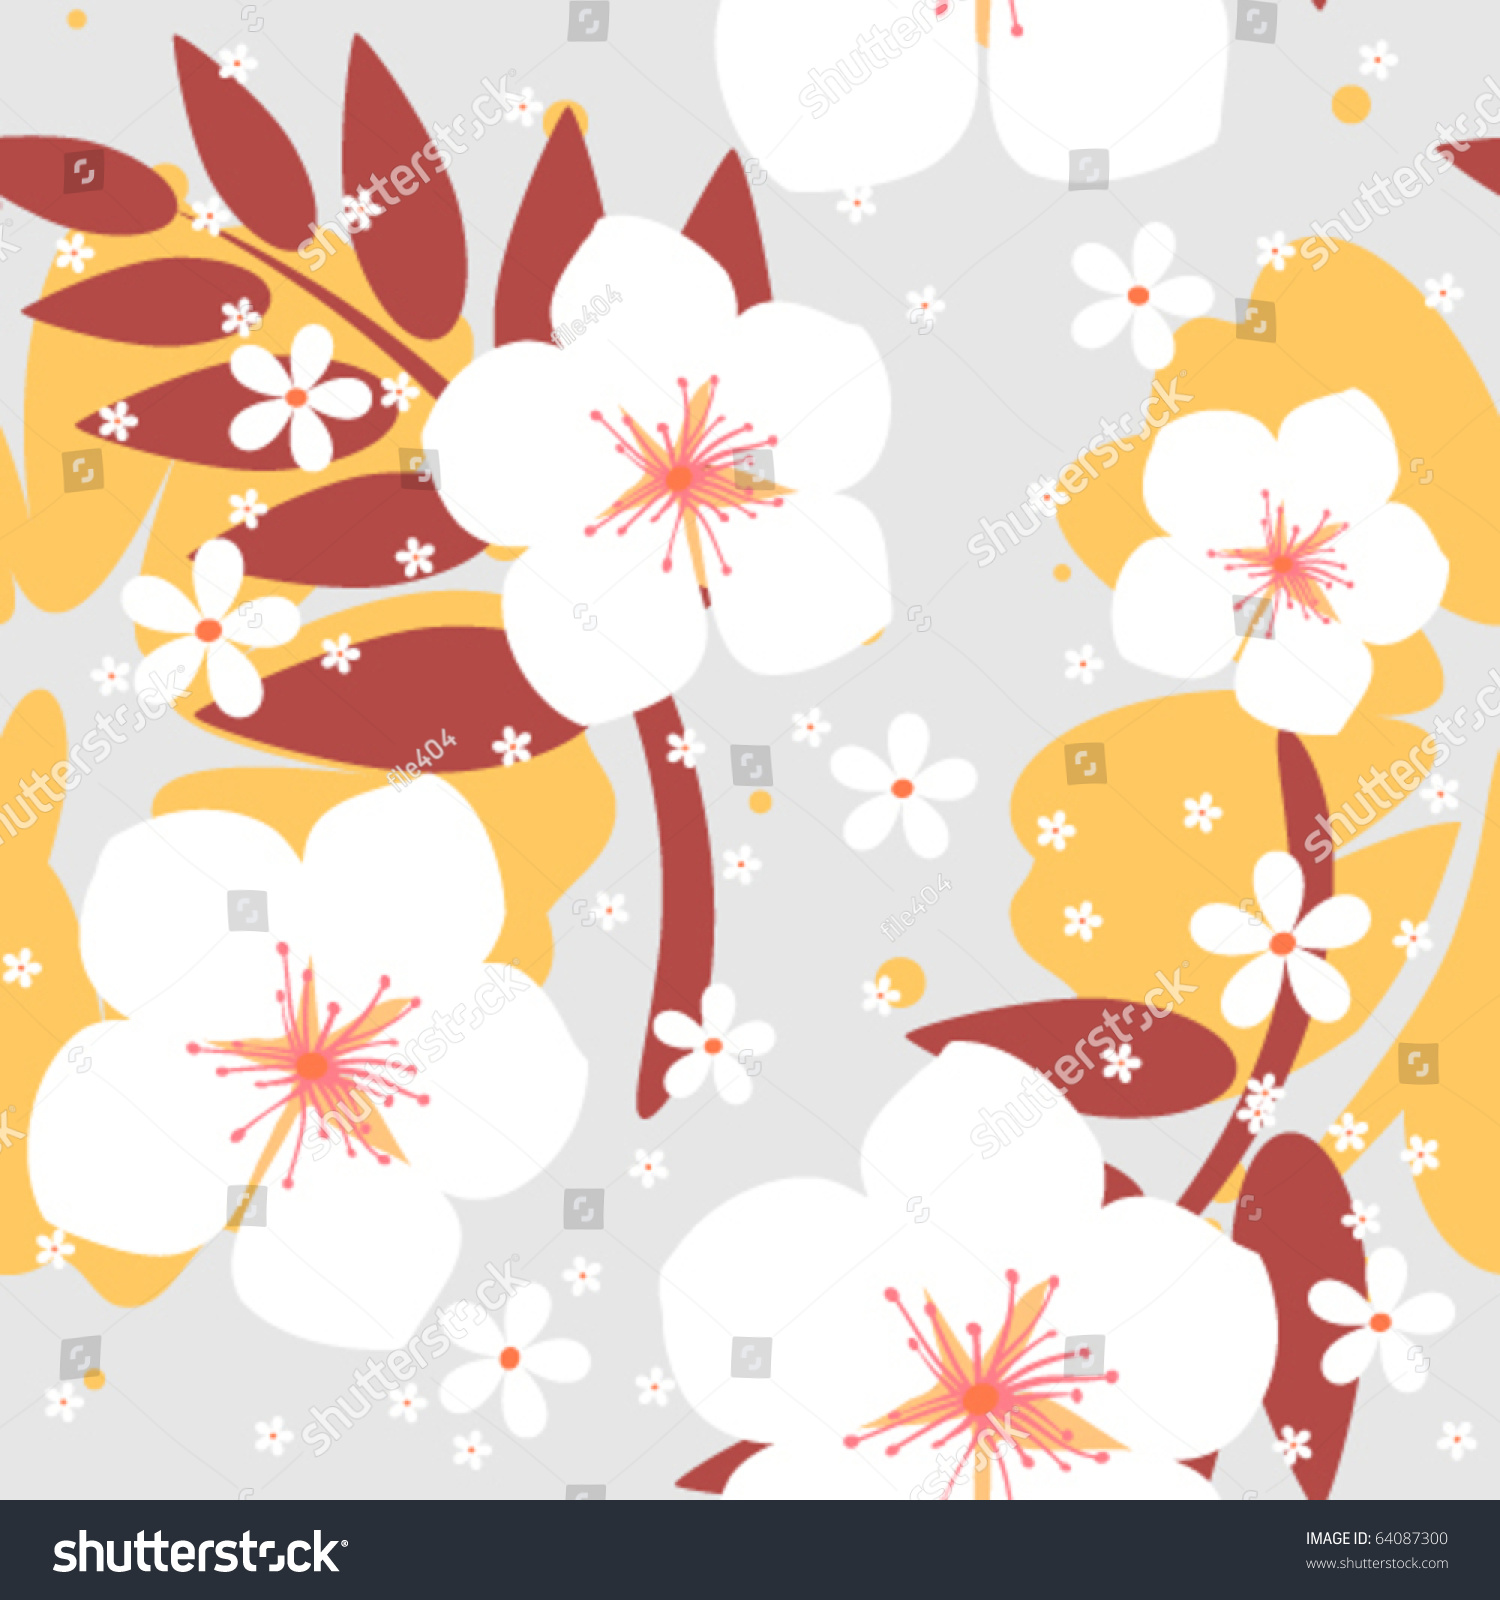 Floral Seamless Background Stock Vector Illustration 64087300